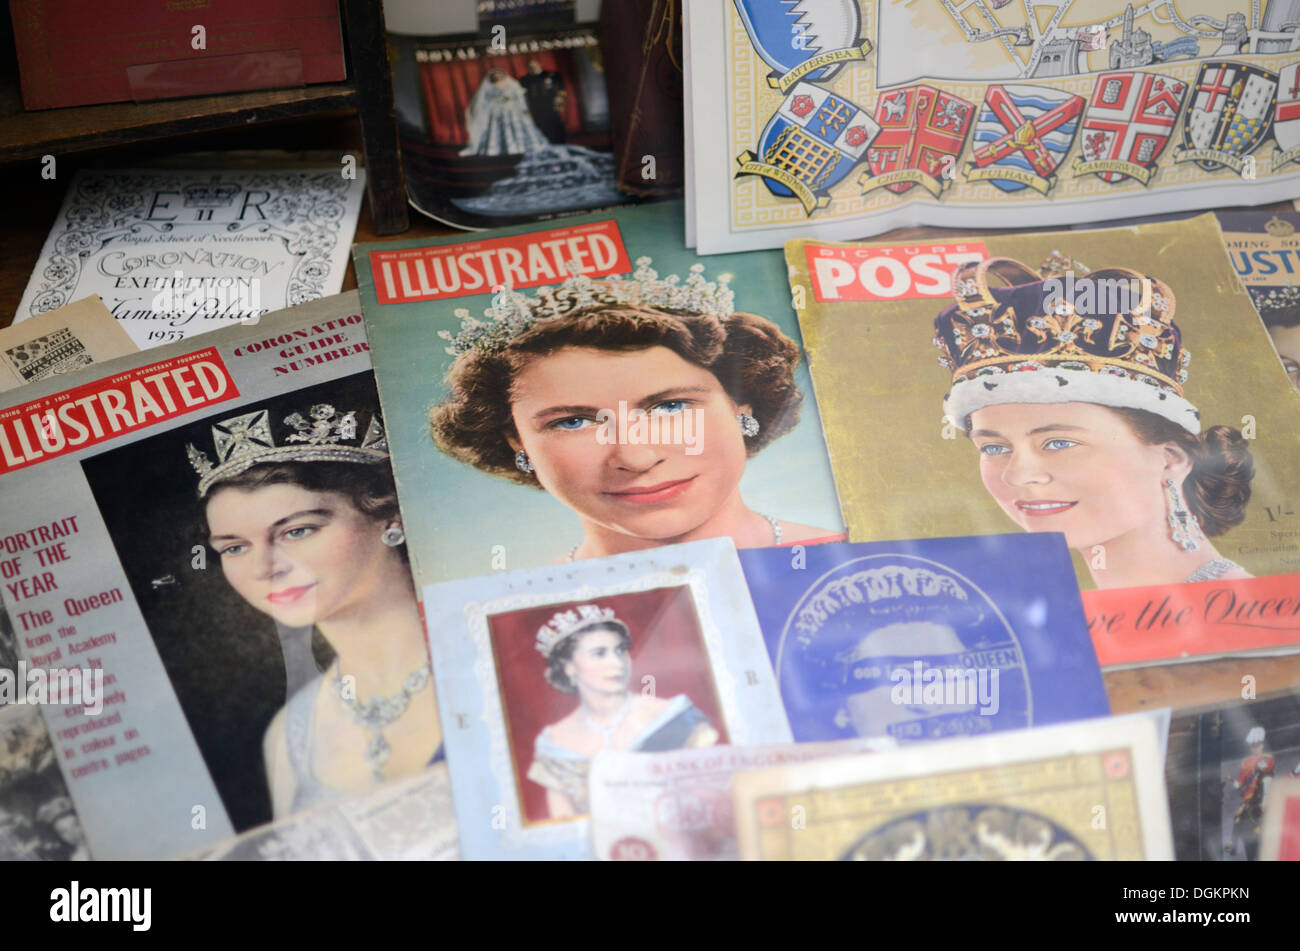 Images of Queen Elizabeth II on the covers of old magazines in a shop window display. Stock Photo